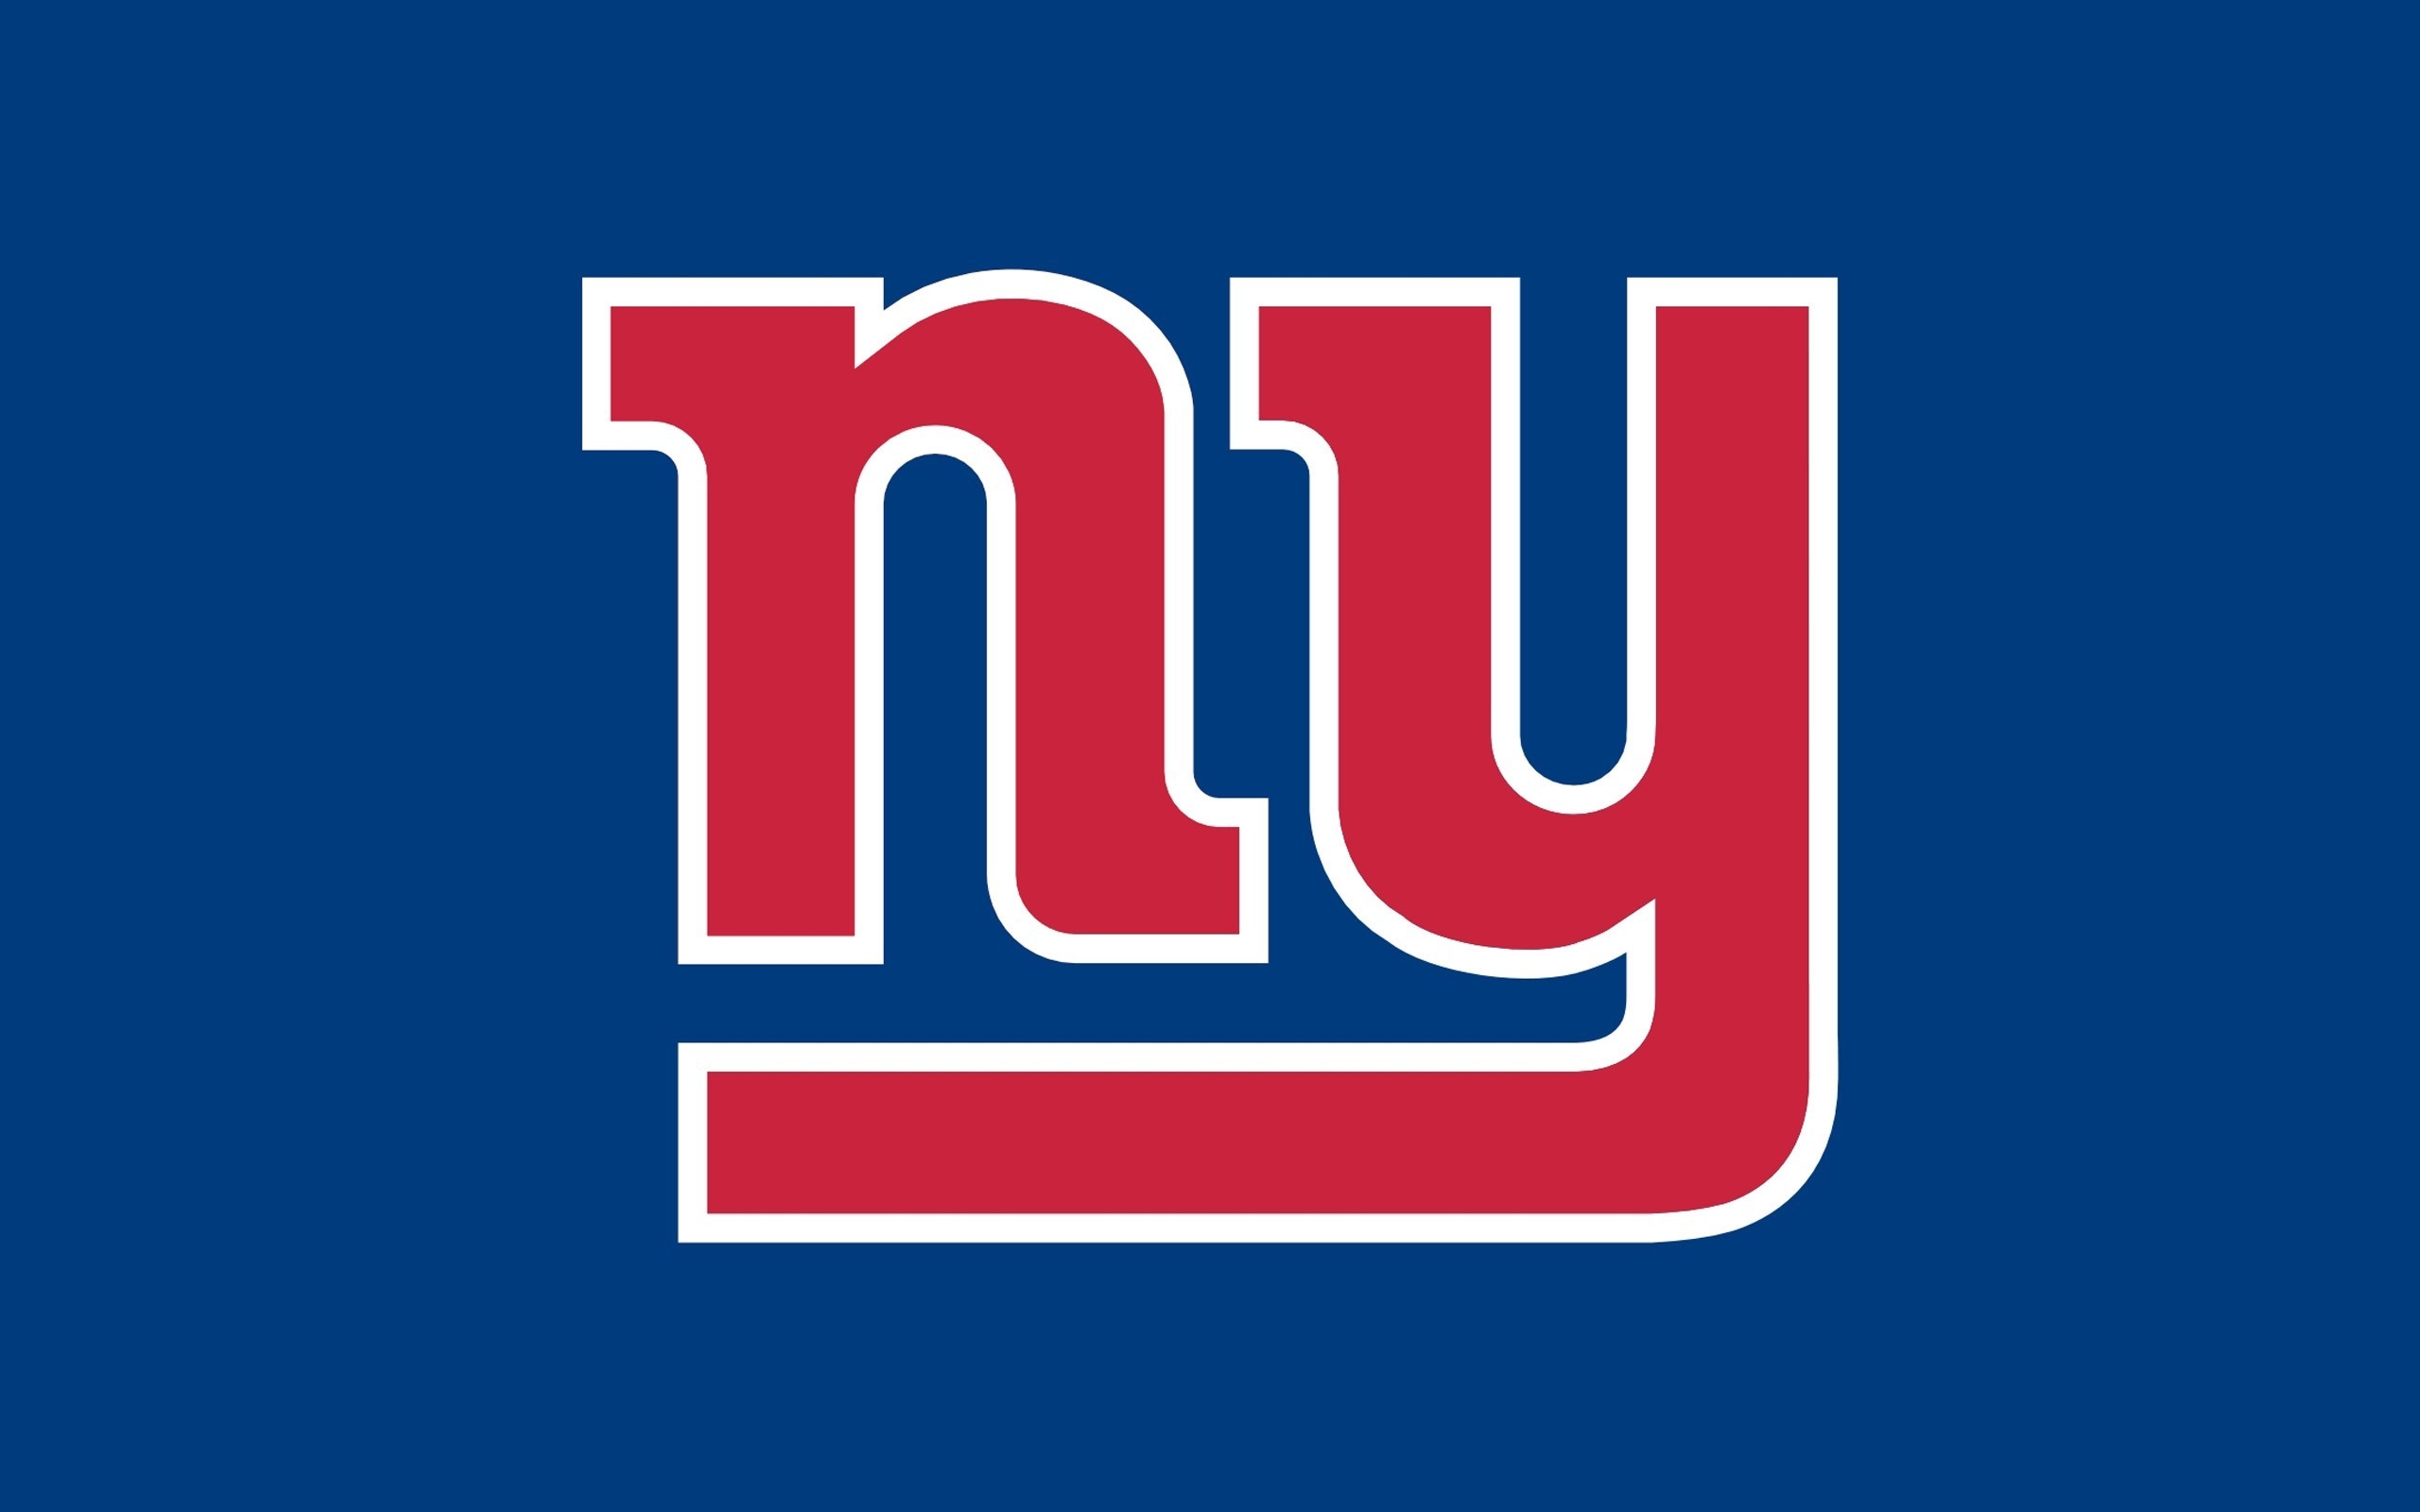 2560x1600 New York Giants Wallpapers For Desktop, HQ Backgrounds